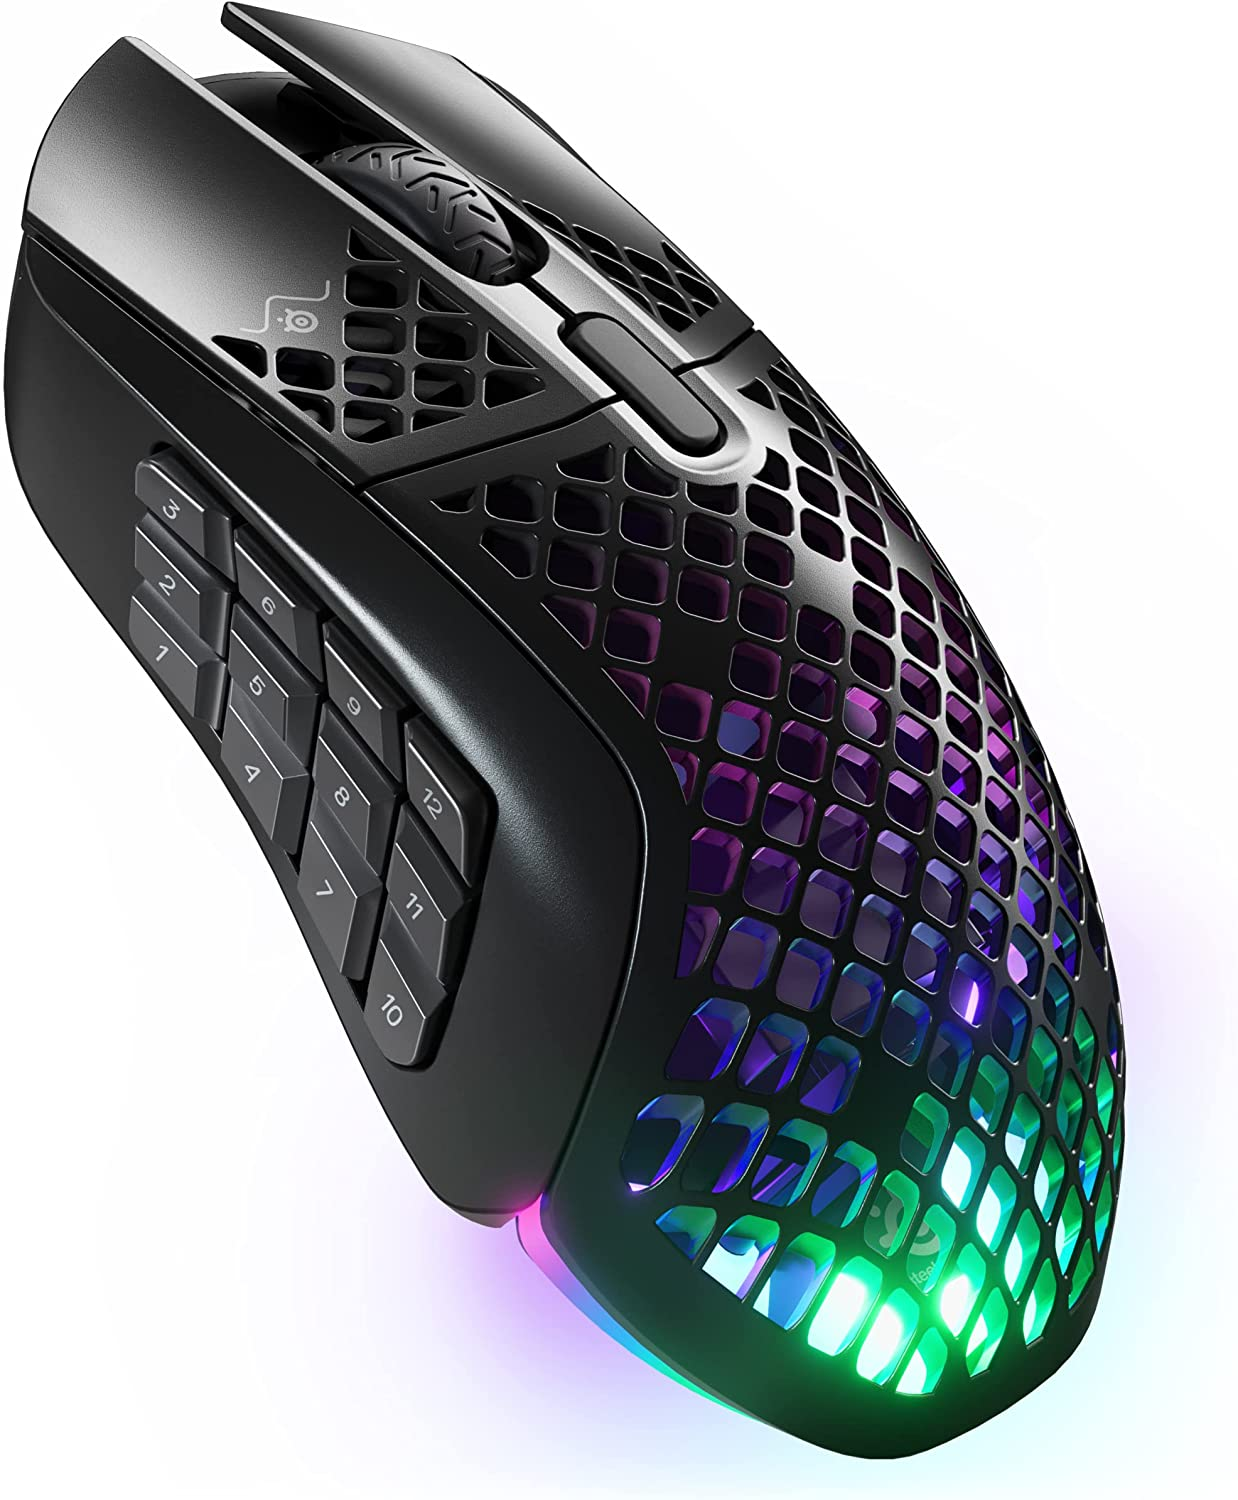 The cost of a gaming mouse depends on its sensors, wireless capabilities, design, and programmable features.